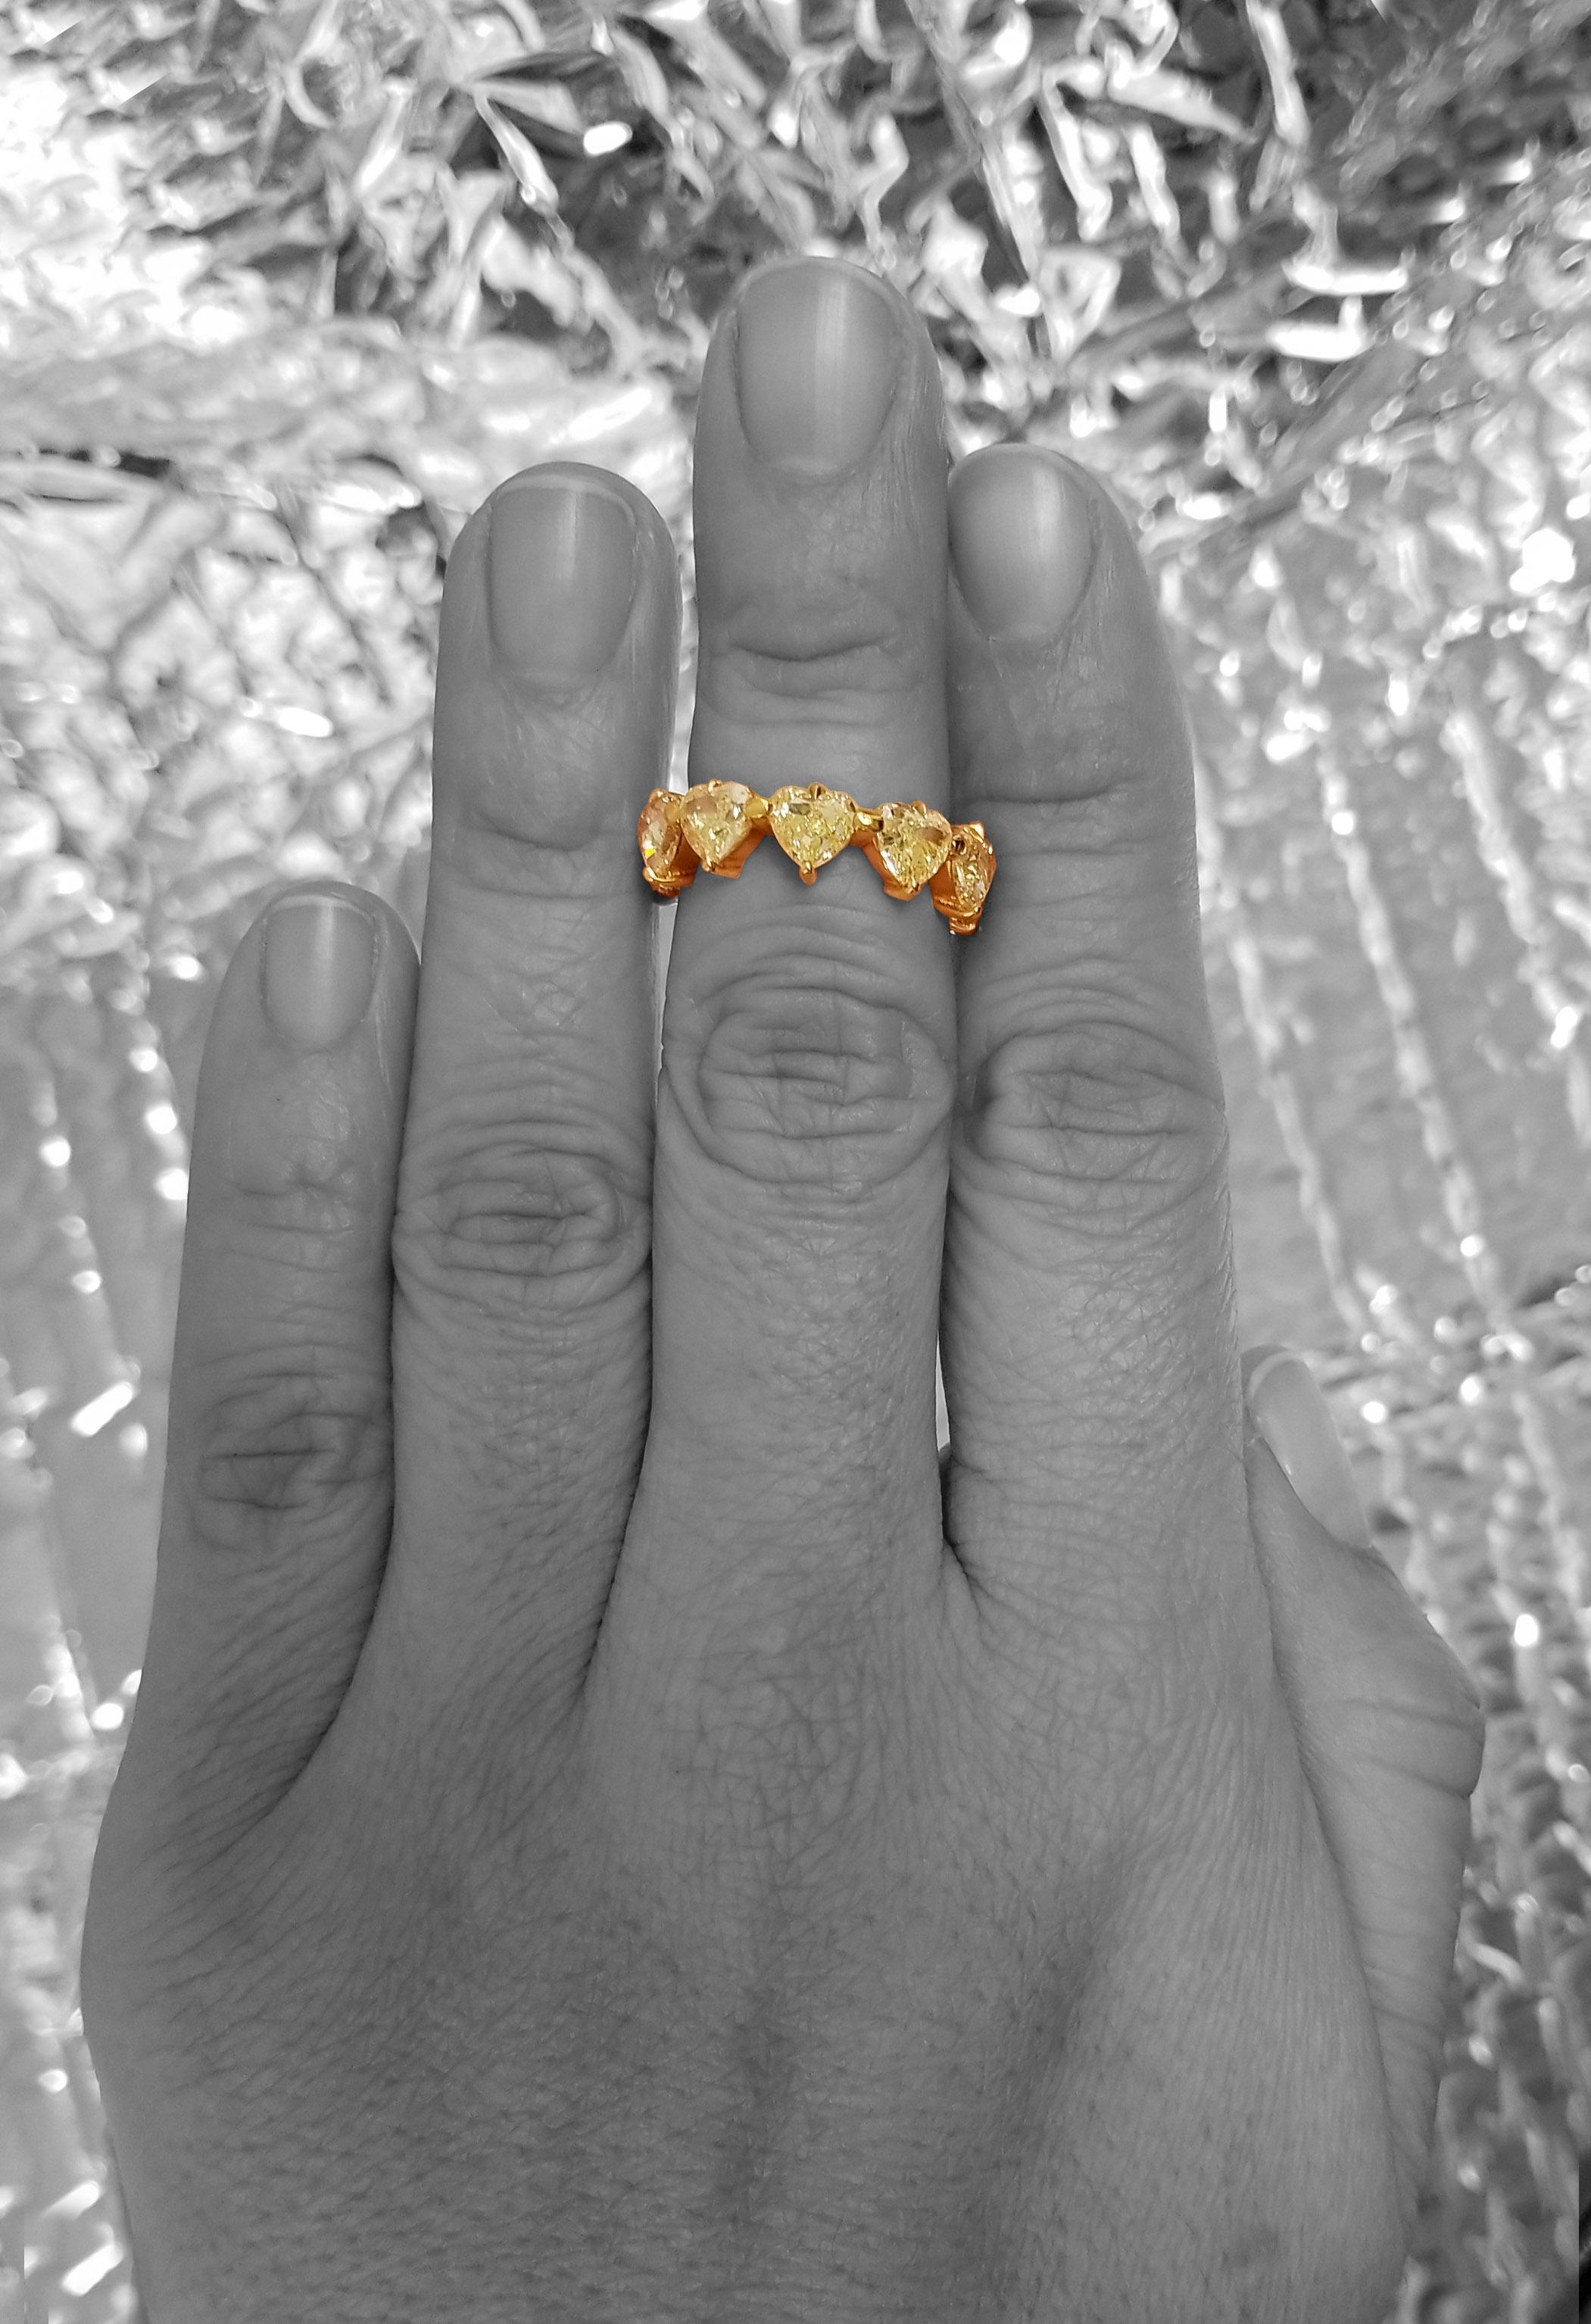 Women's Scarselli Heart Band Ring in 18 Karat Gold with Natural Yellow Diamonds